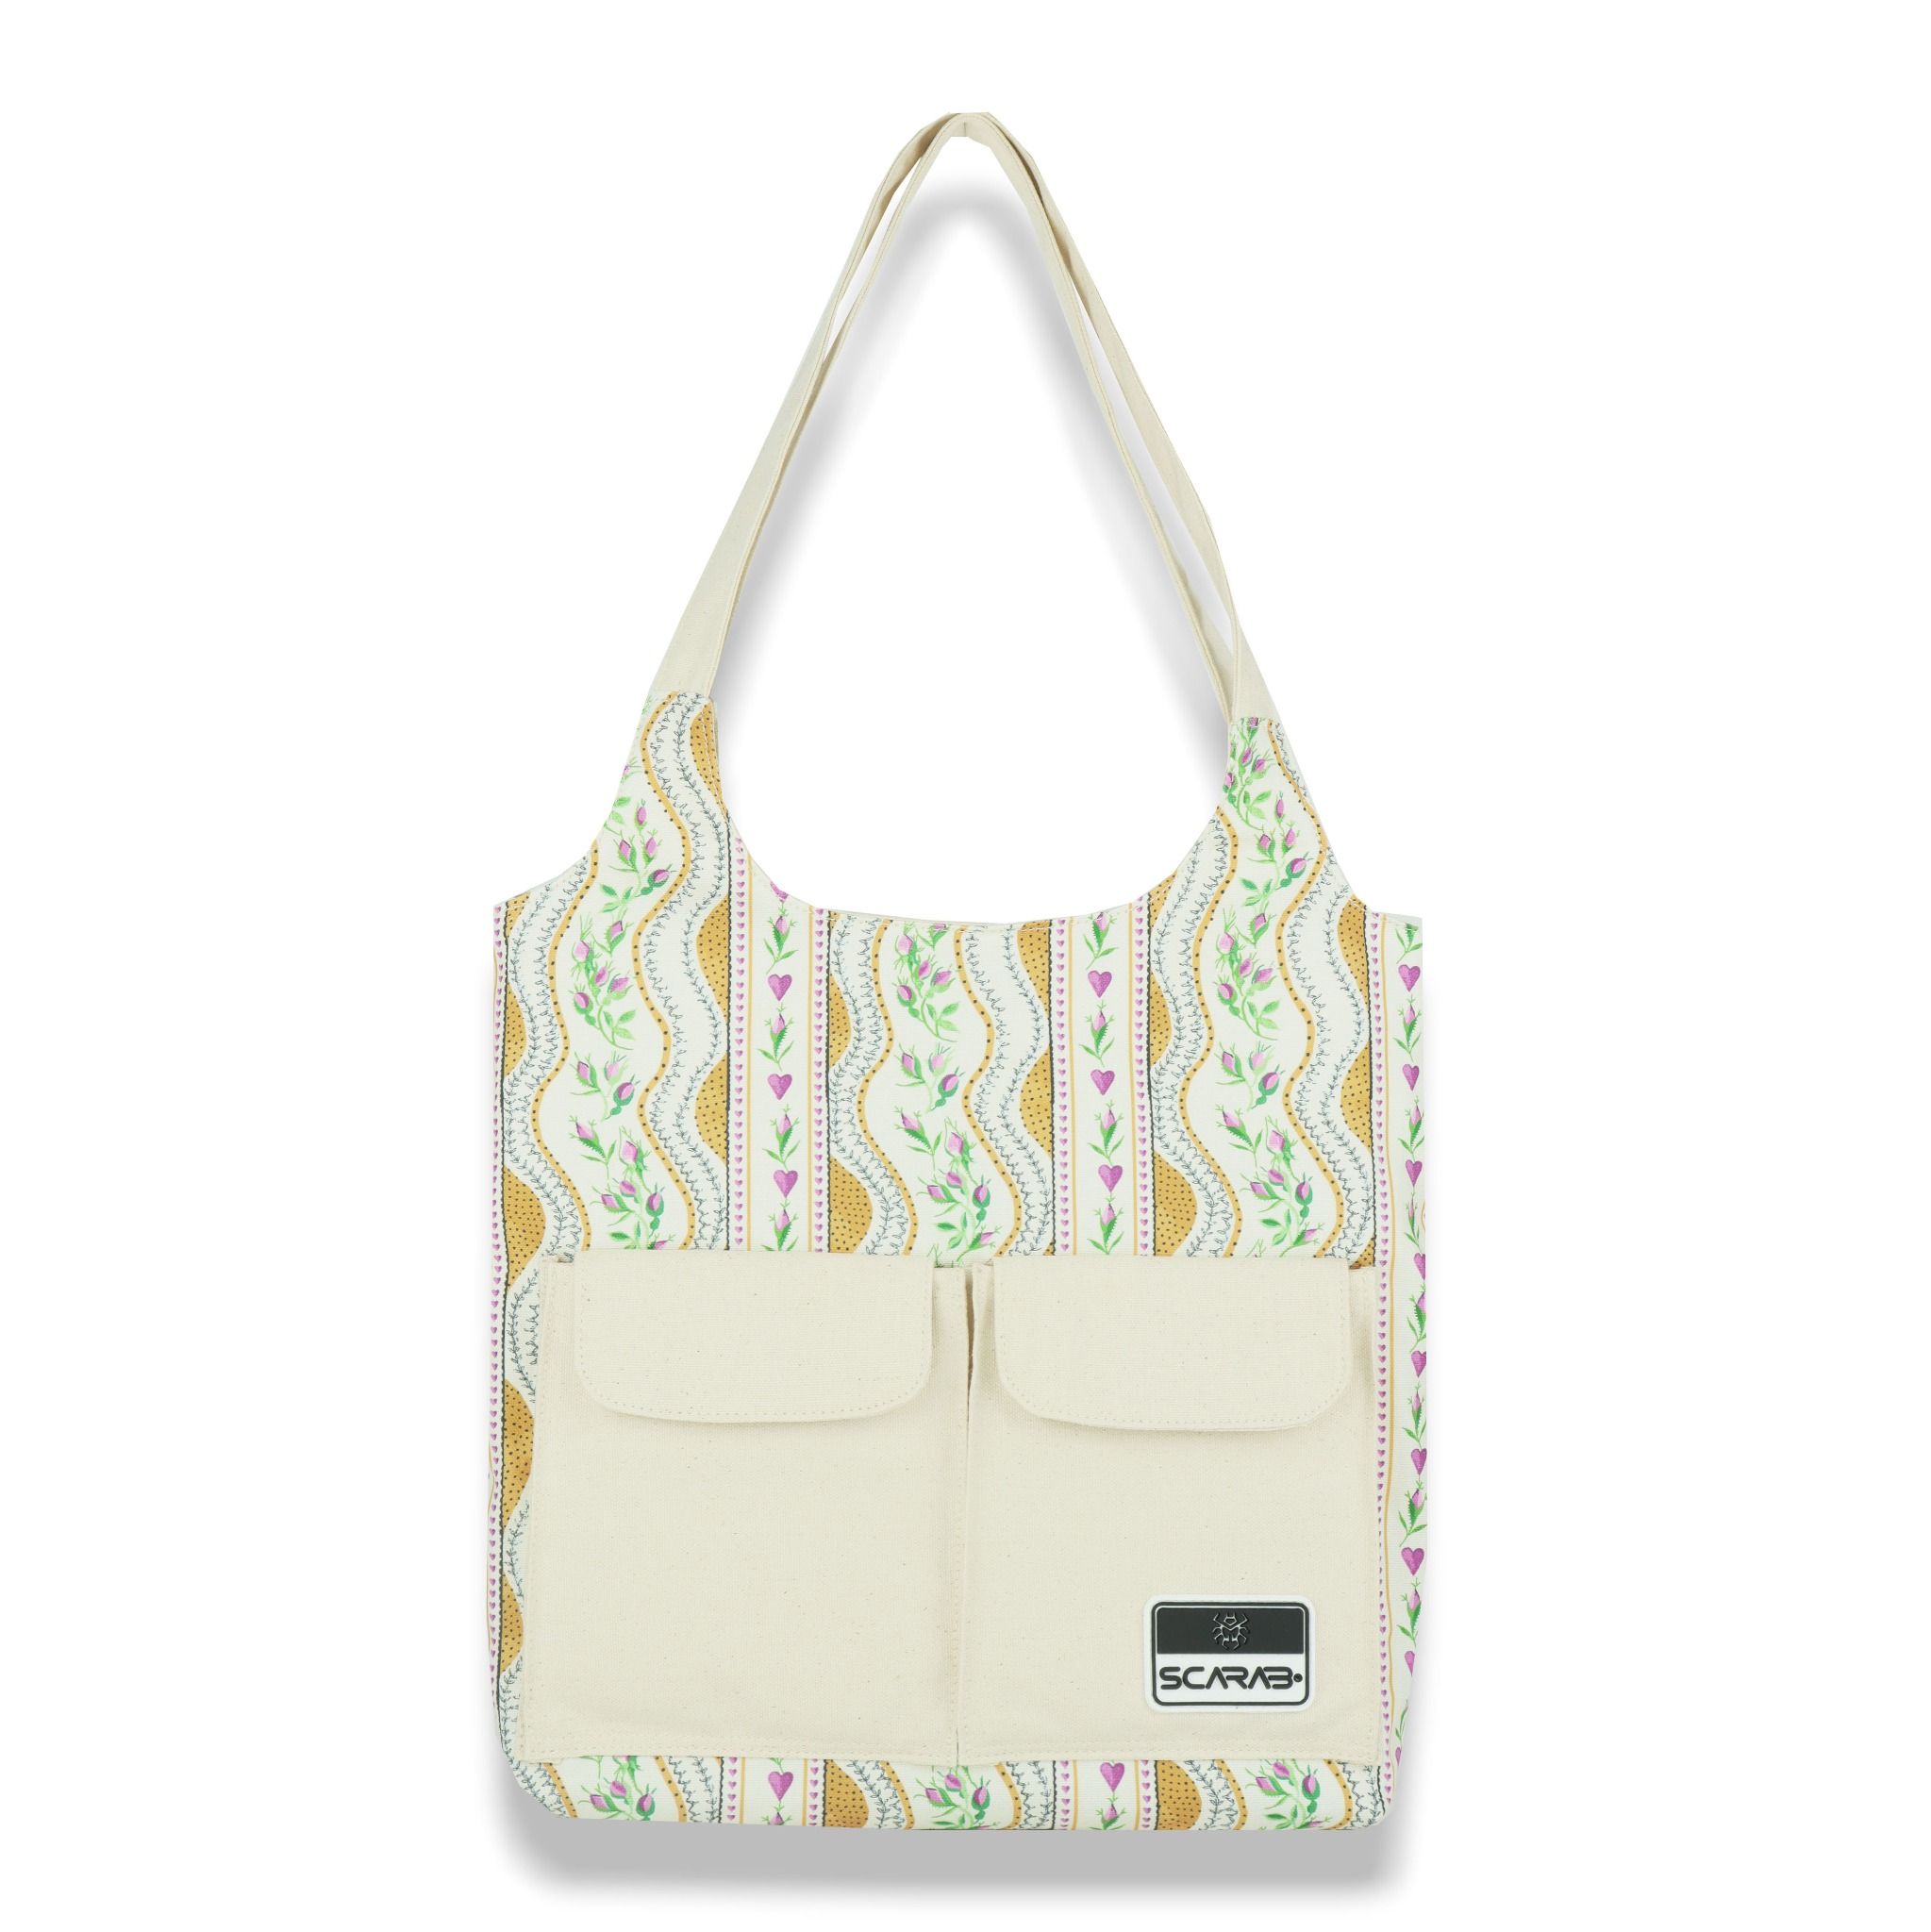  CARRY TOTE BAG - PATTERN 